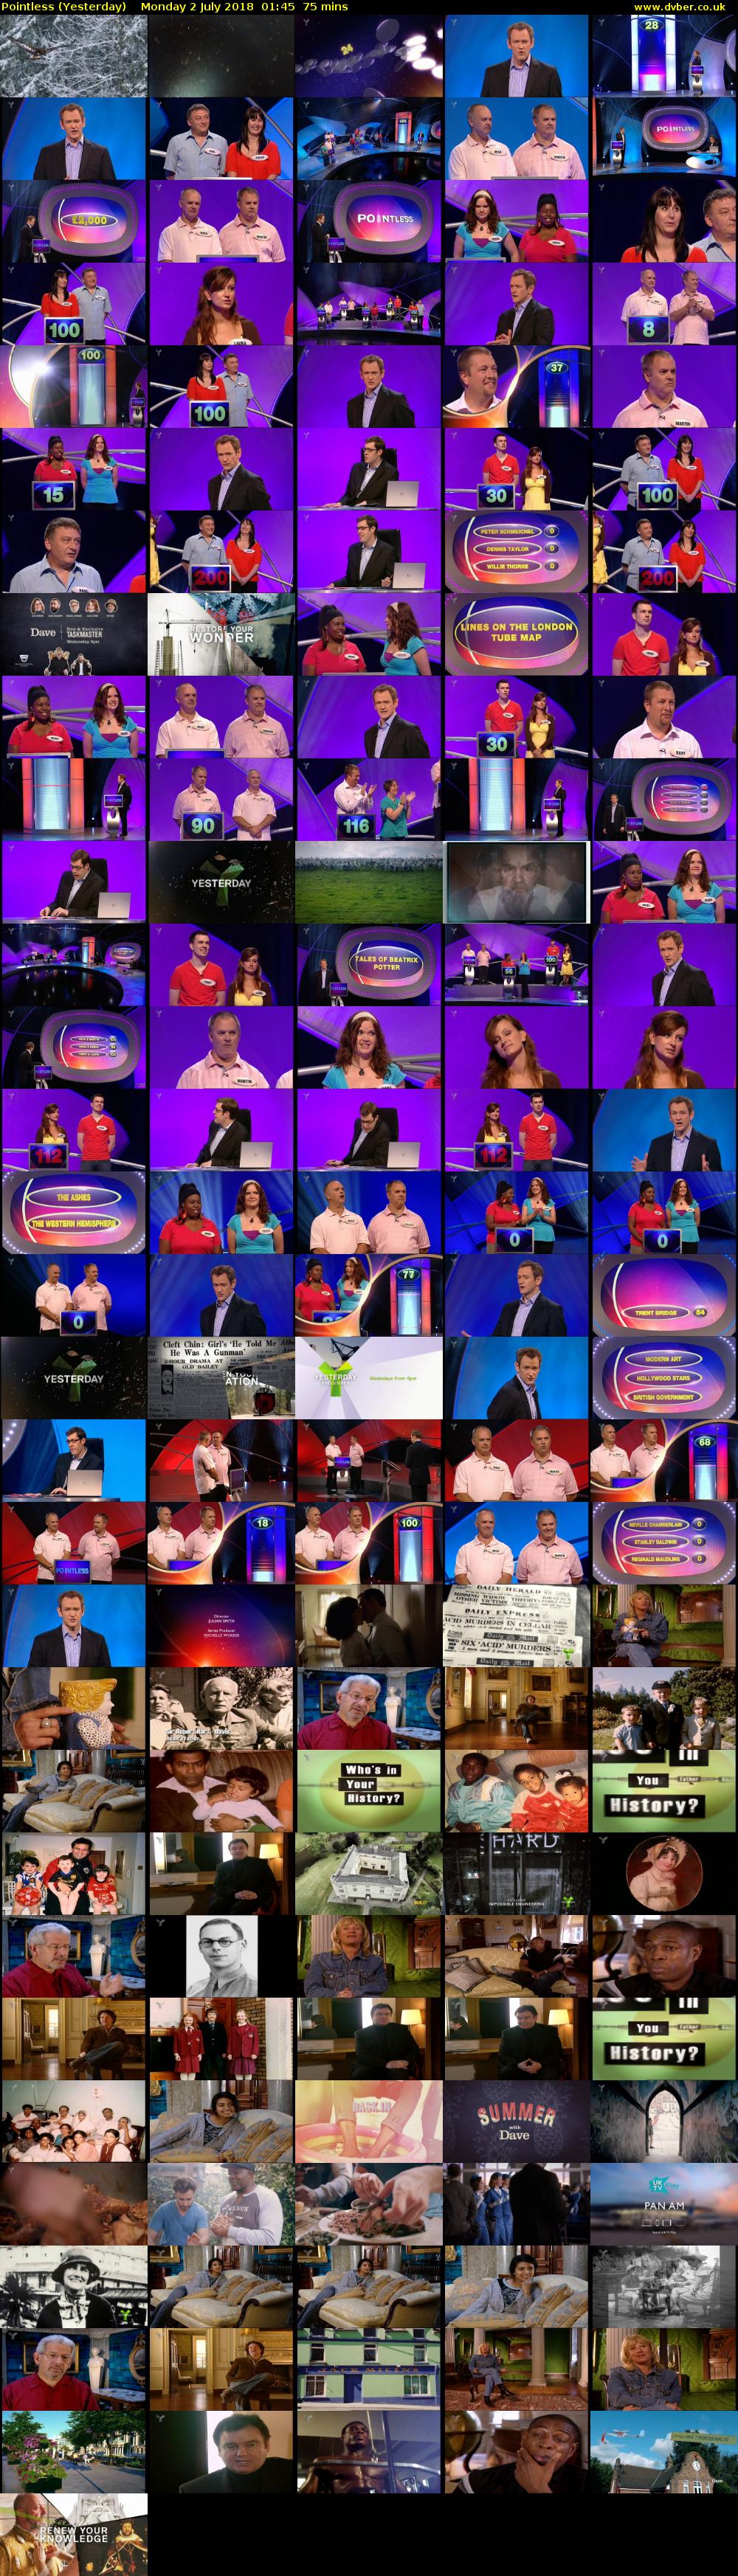 Pointless (Yesterday) Monday 2 July 2018 01:45 - 03:00